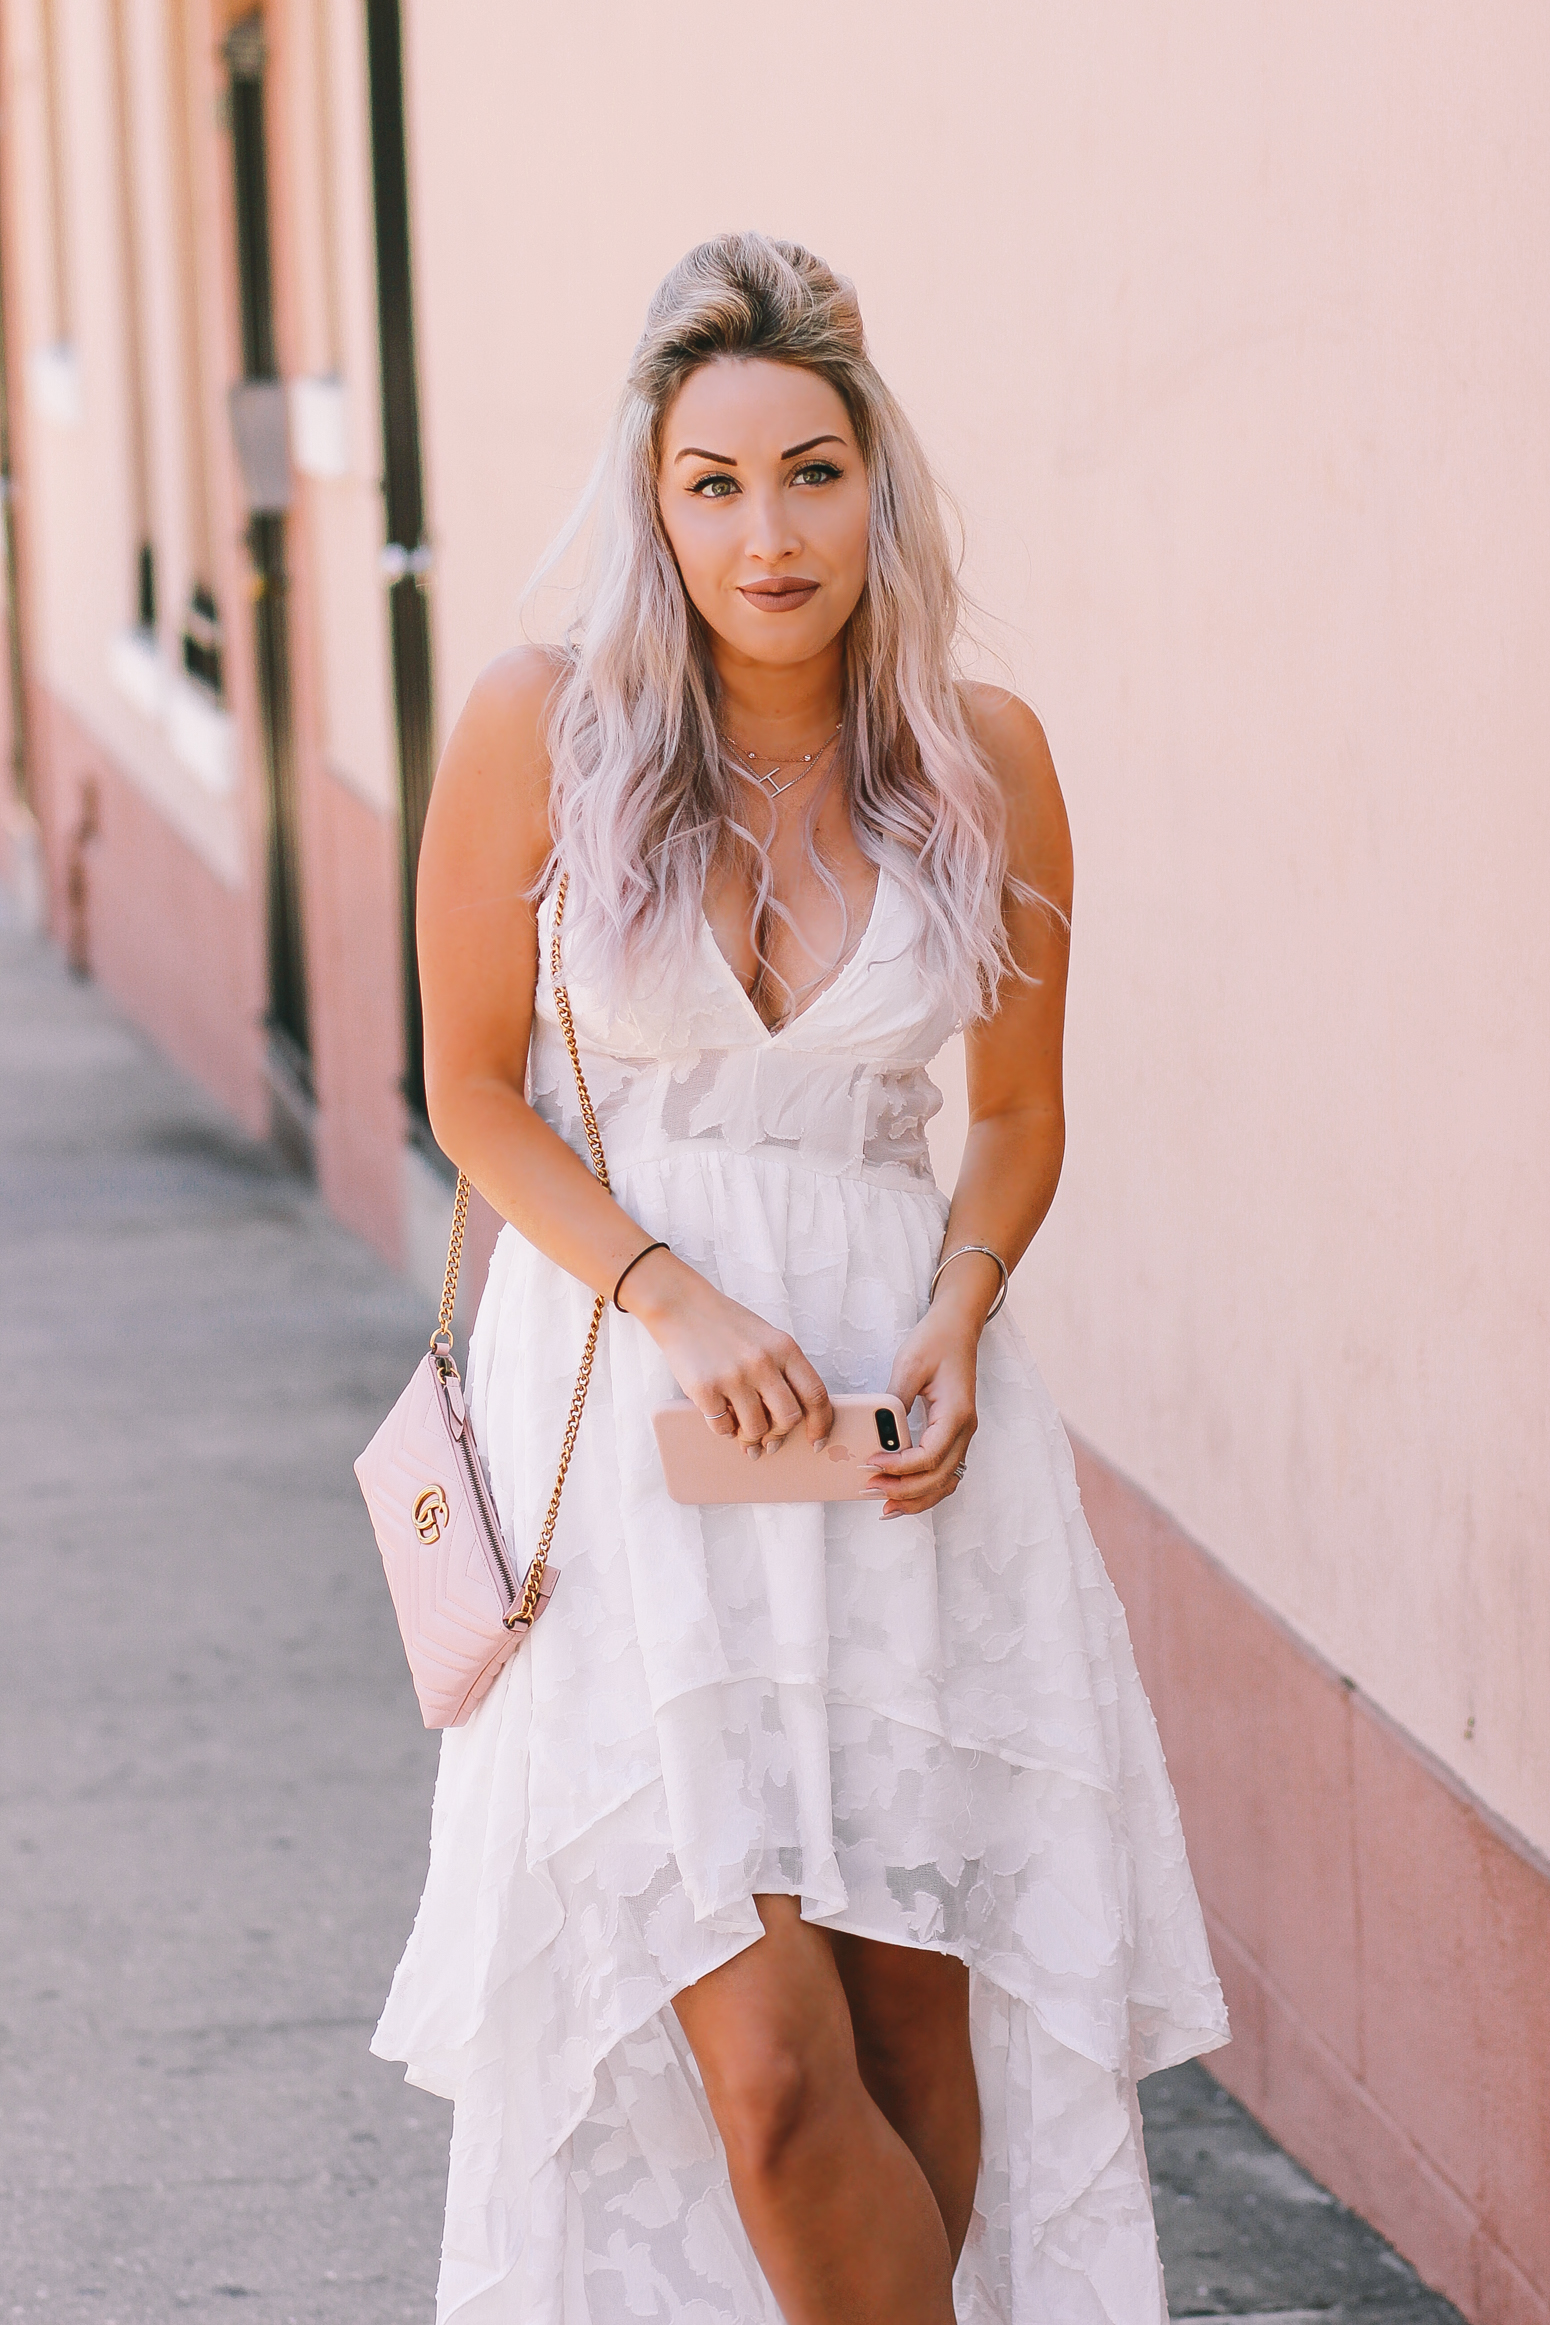 Don't Know What To Wear To Your Bridal Shower? Here Are 5 Dresses I've Worn That Would Be Perfect